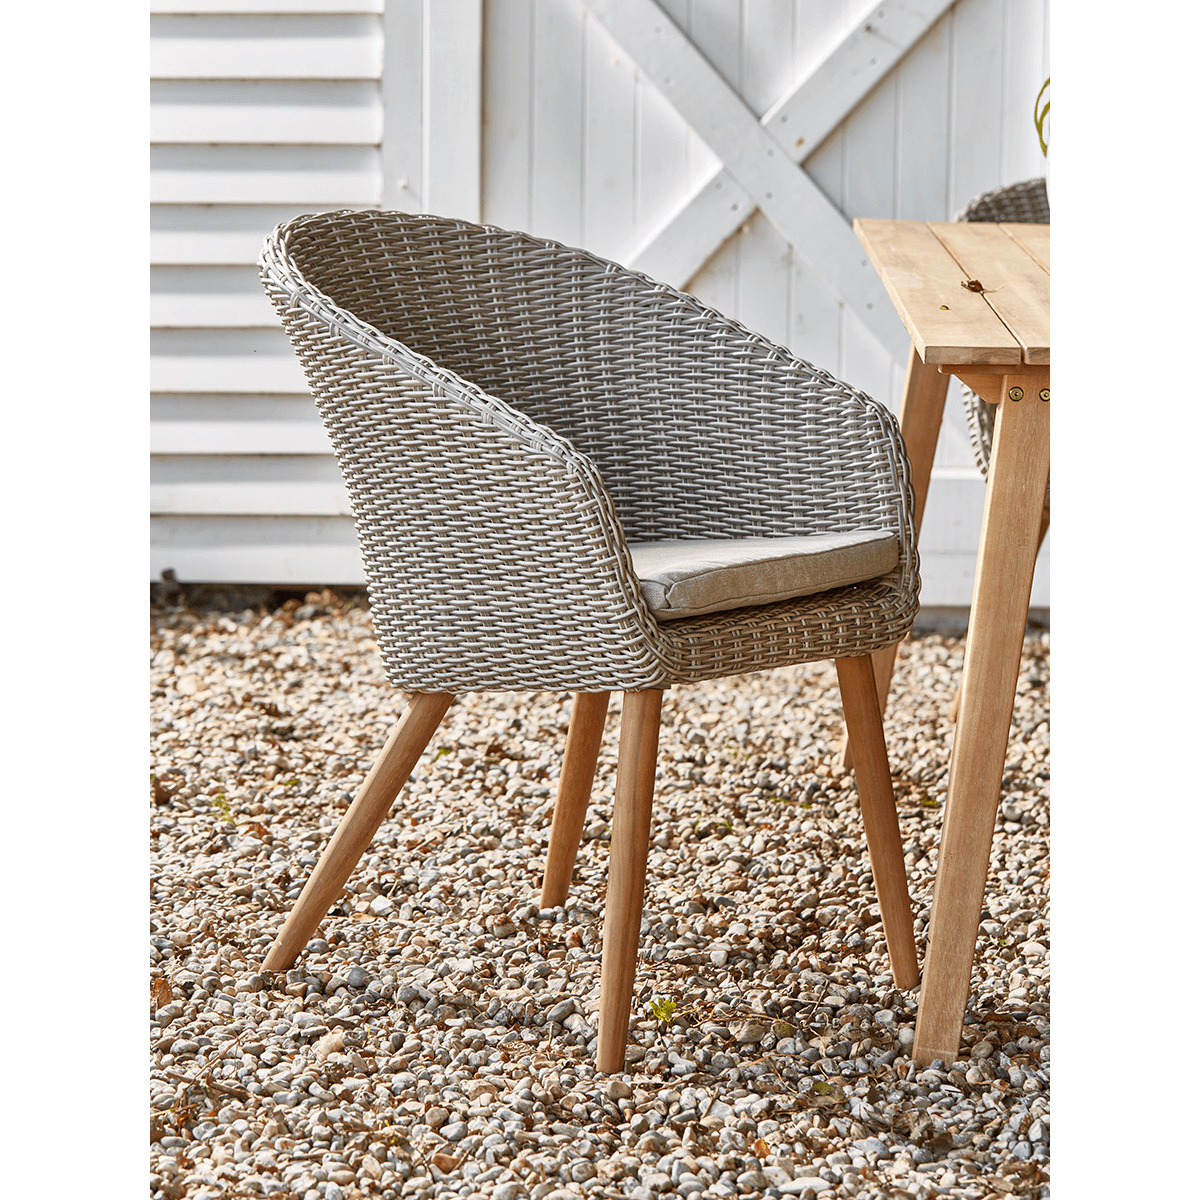 Two Faux Rattan Dining Chairs - image 1